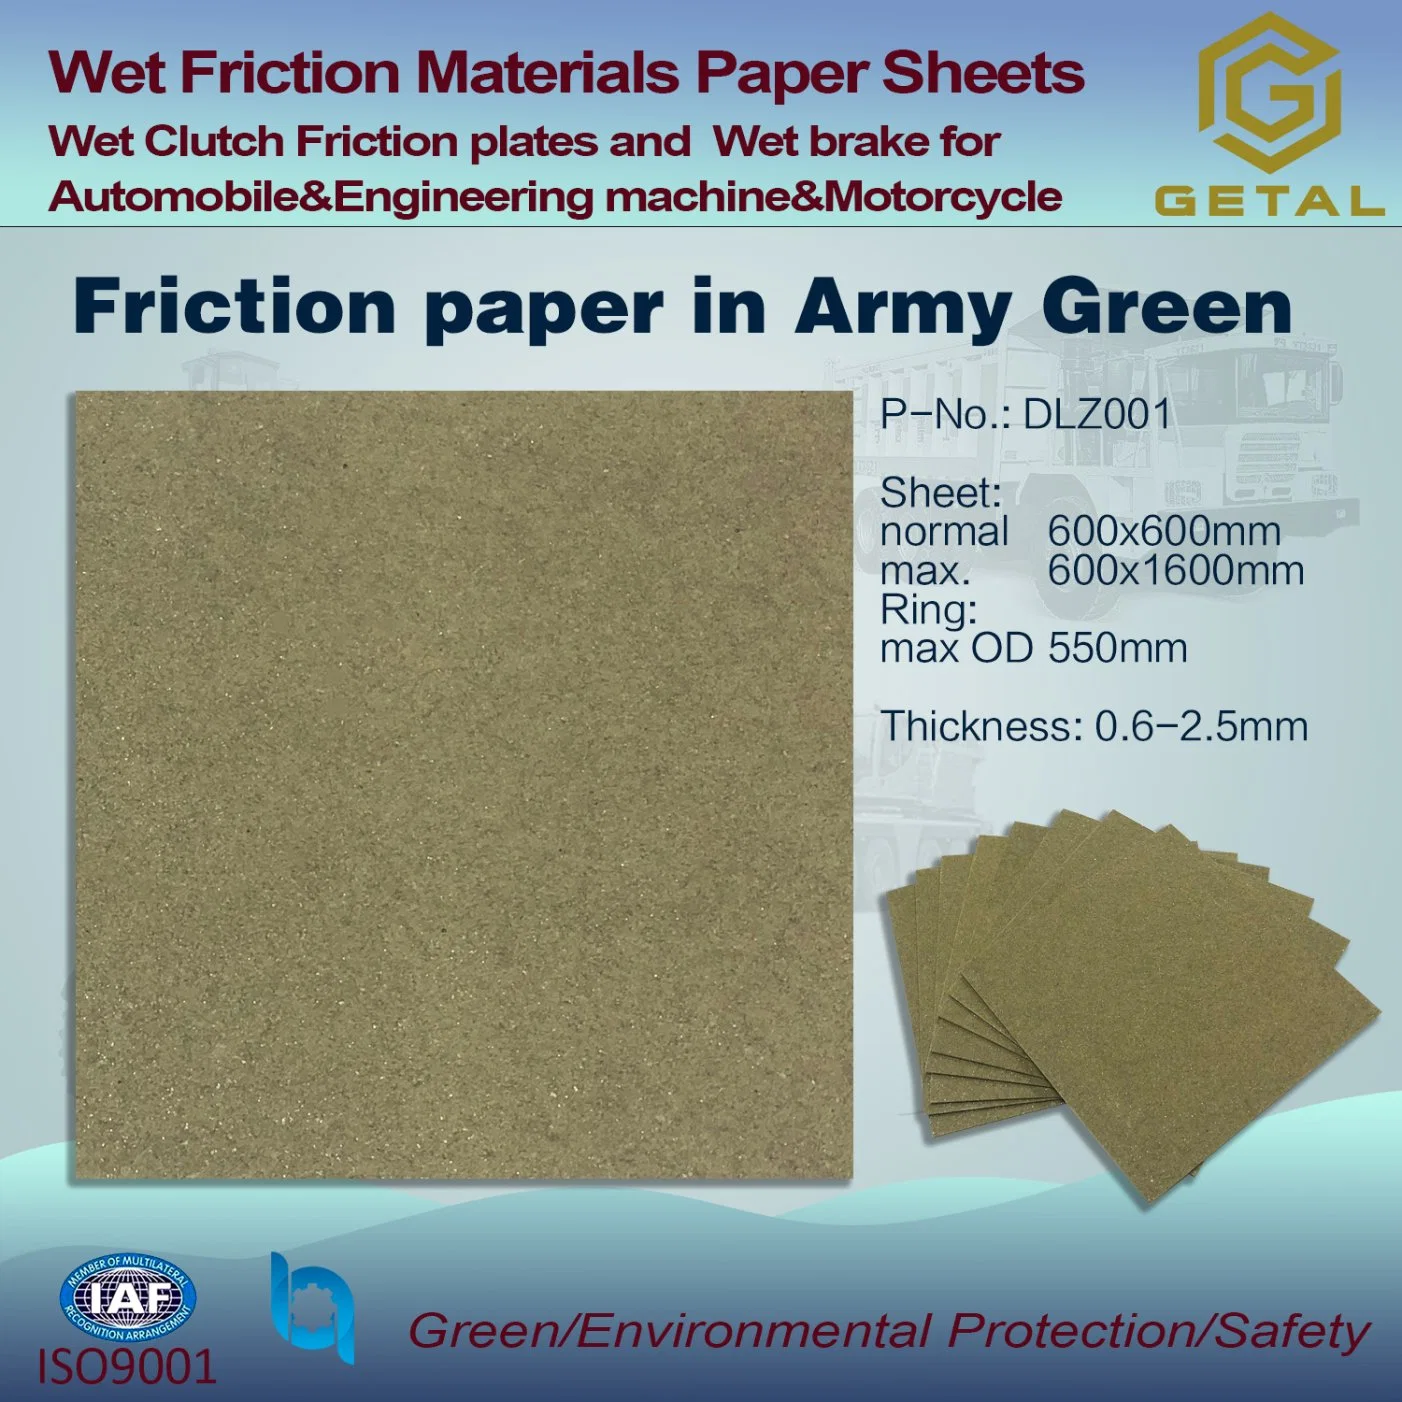 Auto Accessory Wet Friction Materials Paper Sheets Brake for Tractors Harvesters